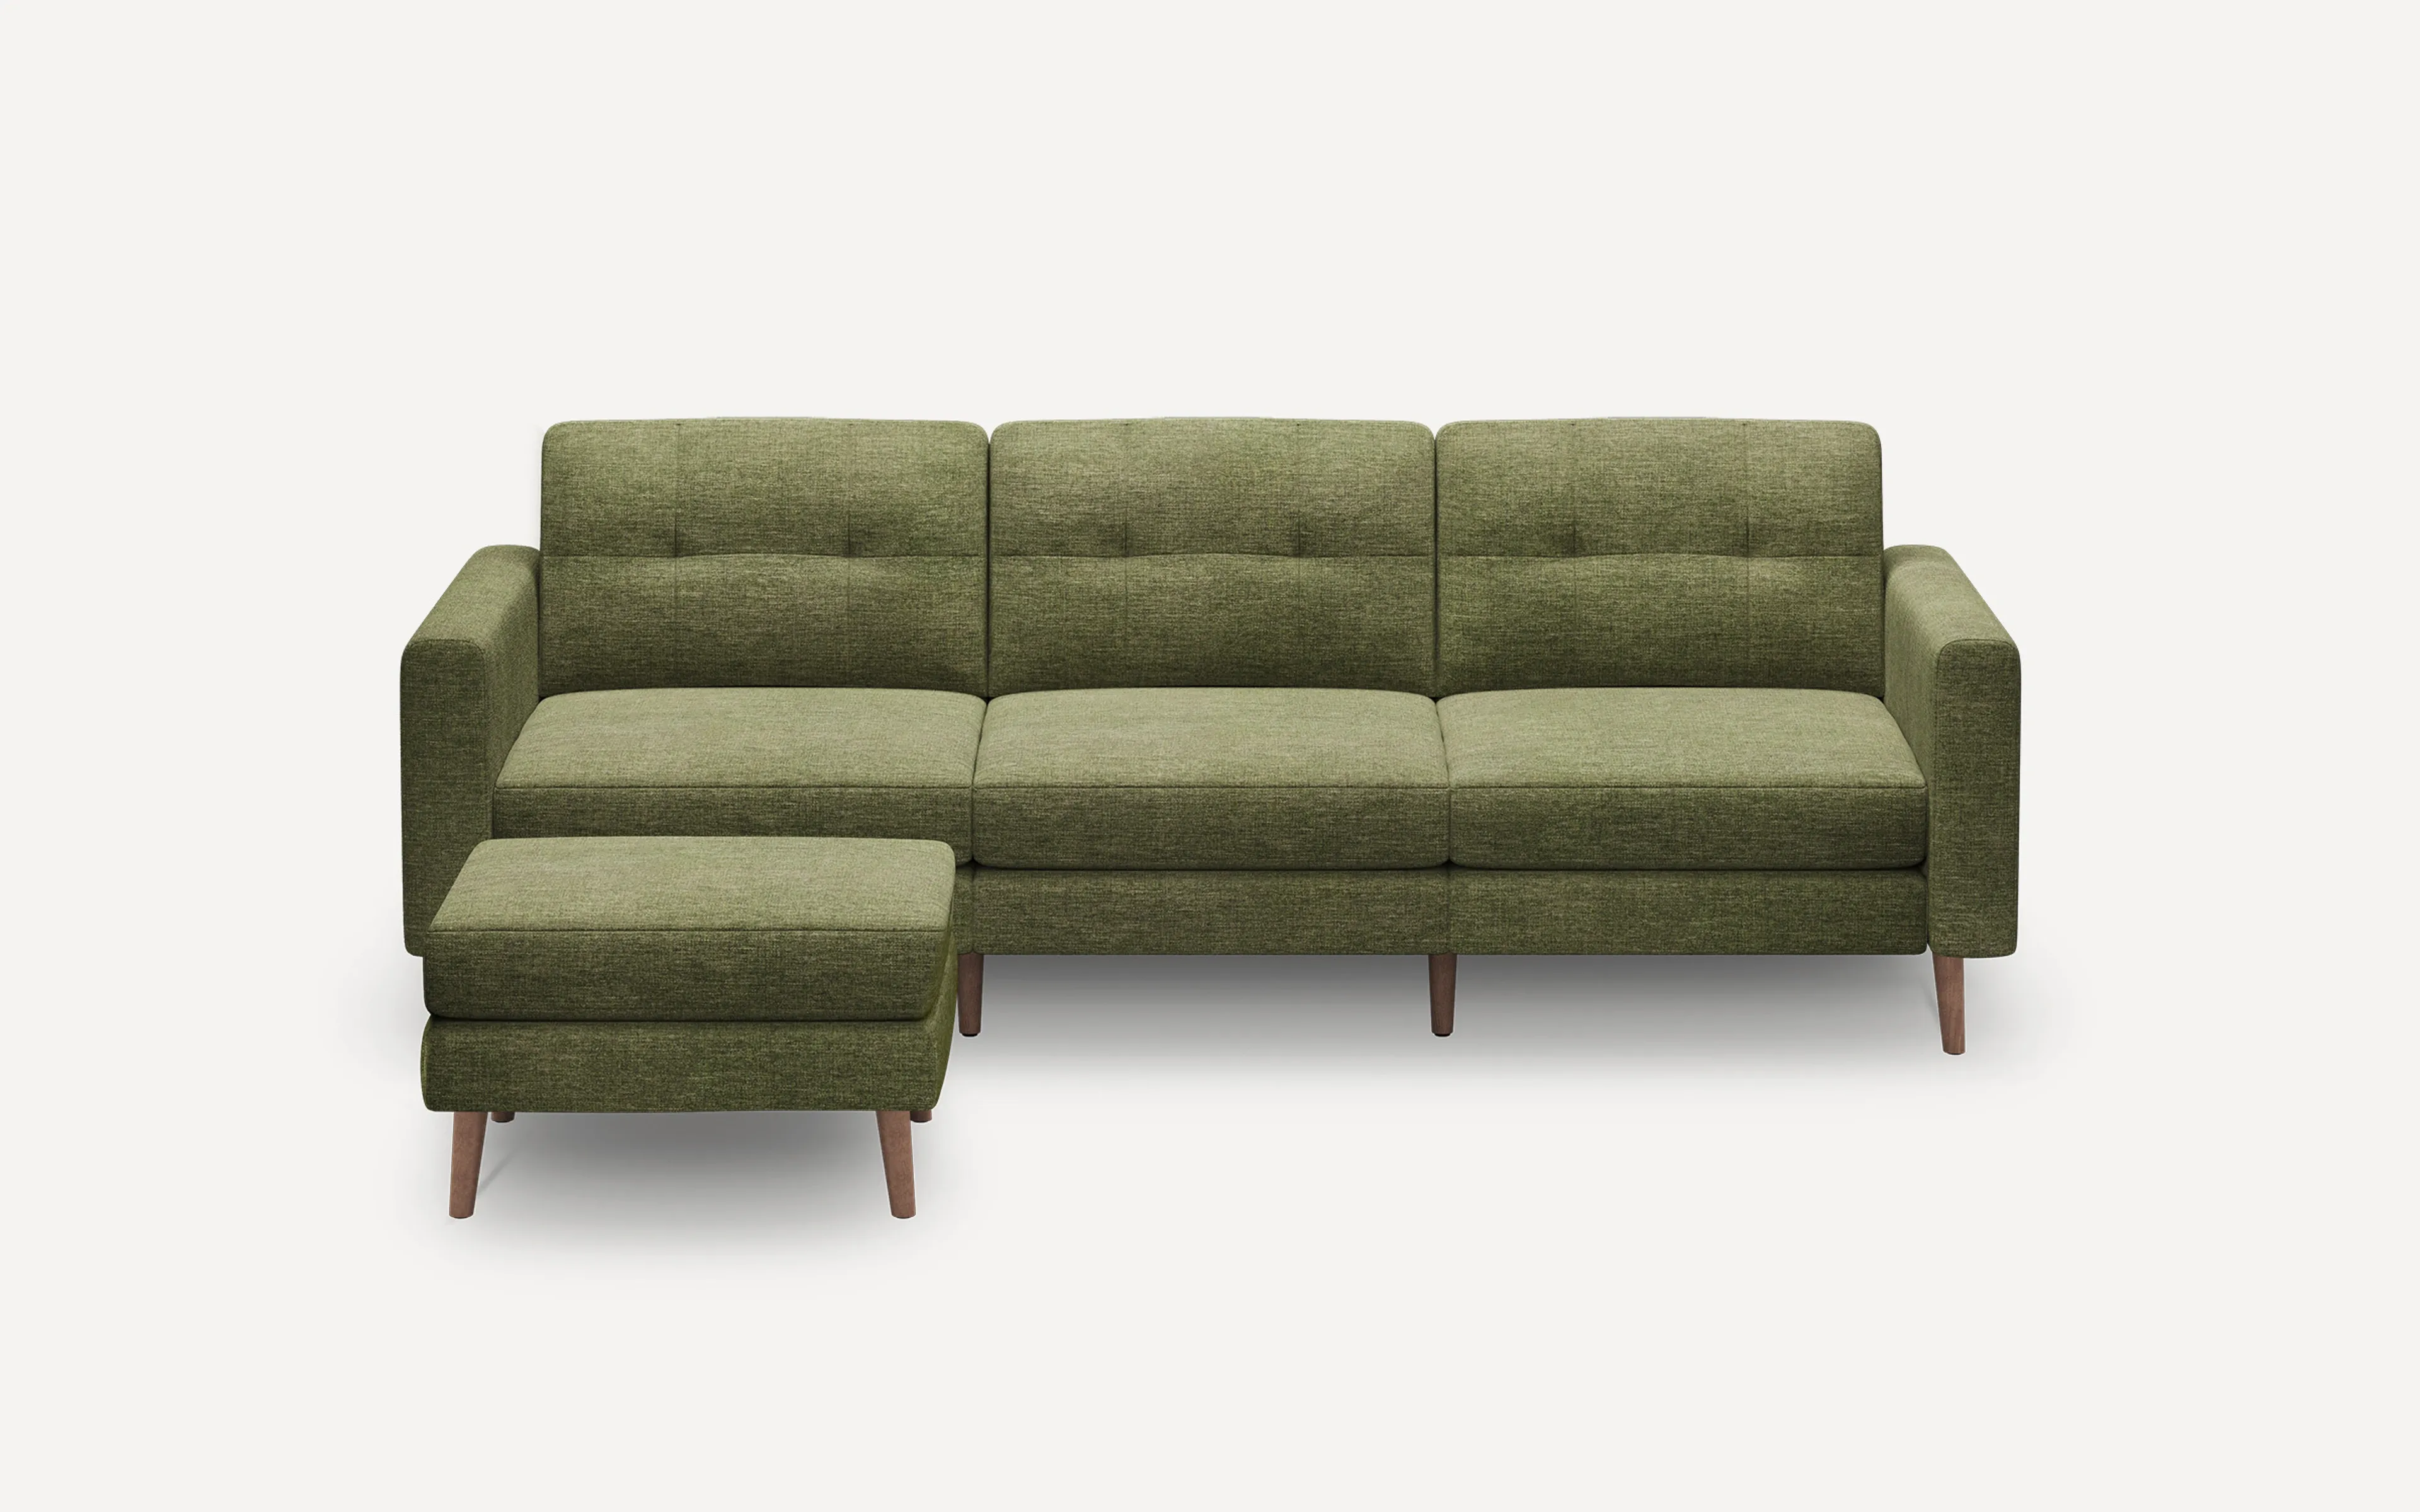 Original Nomad Sofa with Ottoman in Moss Green Fabric